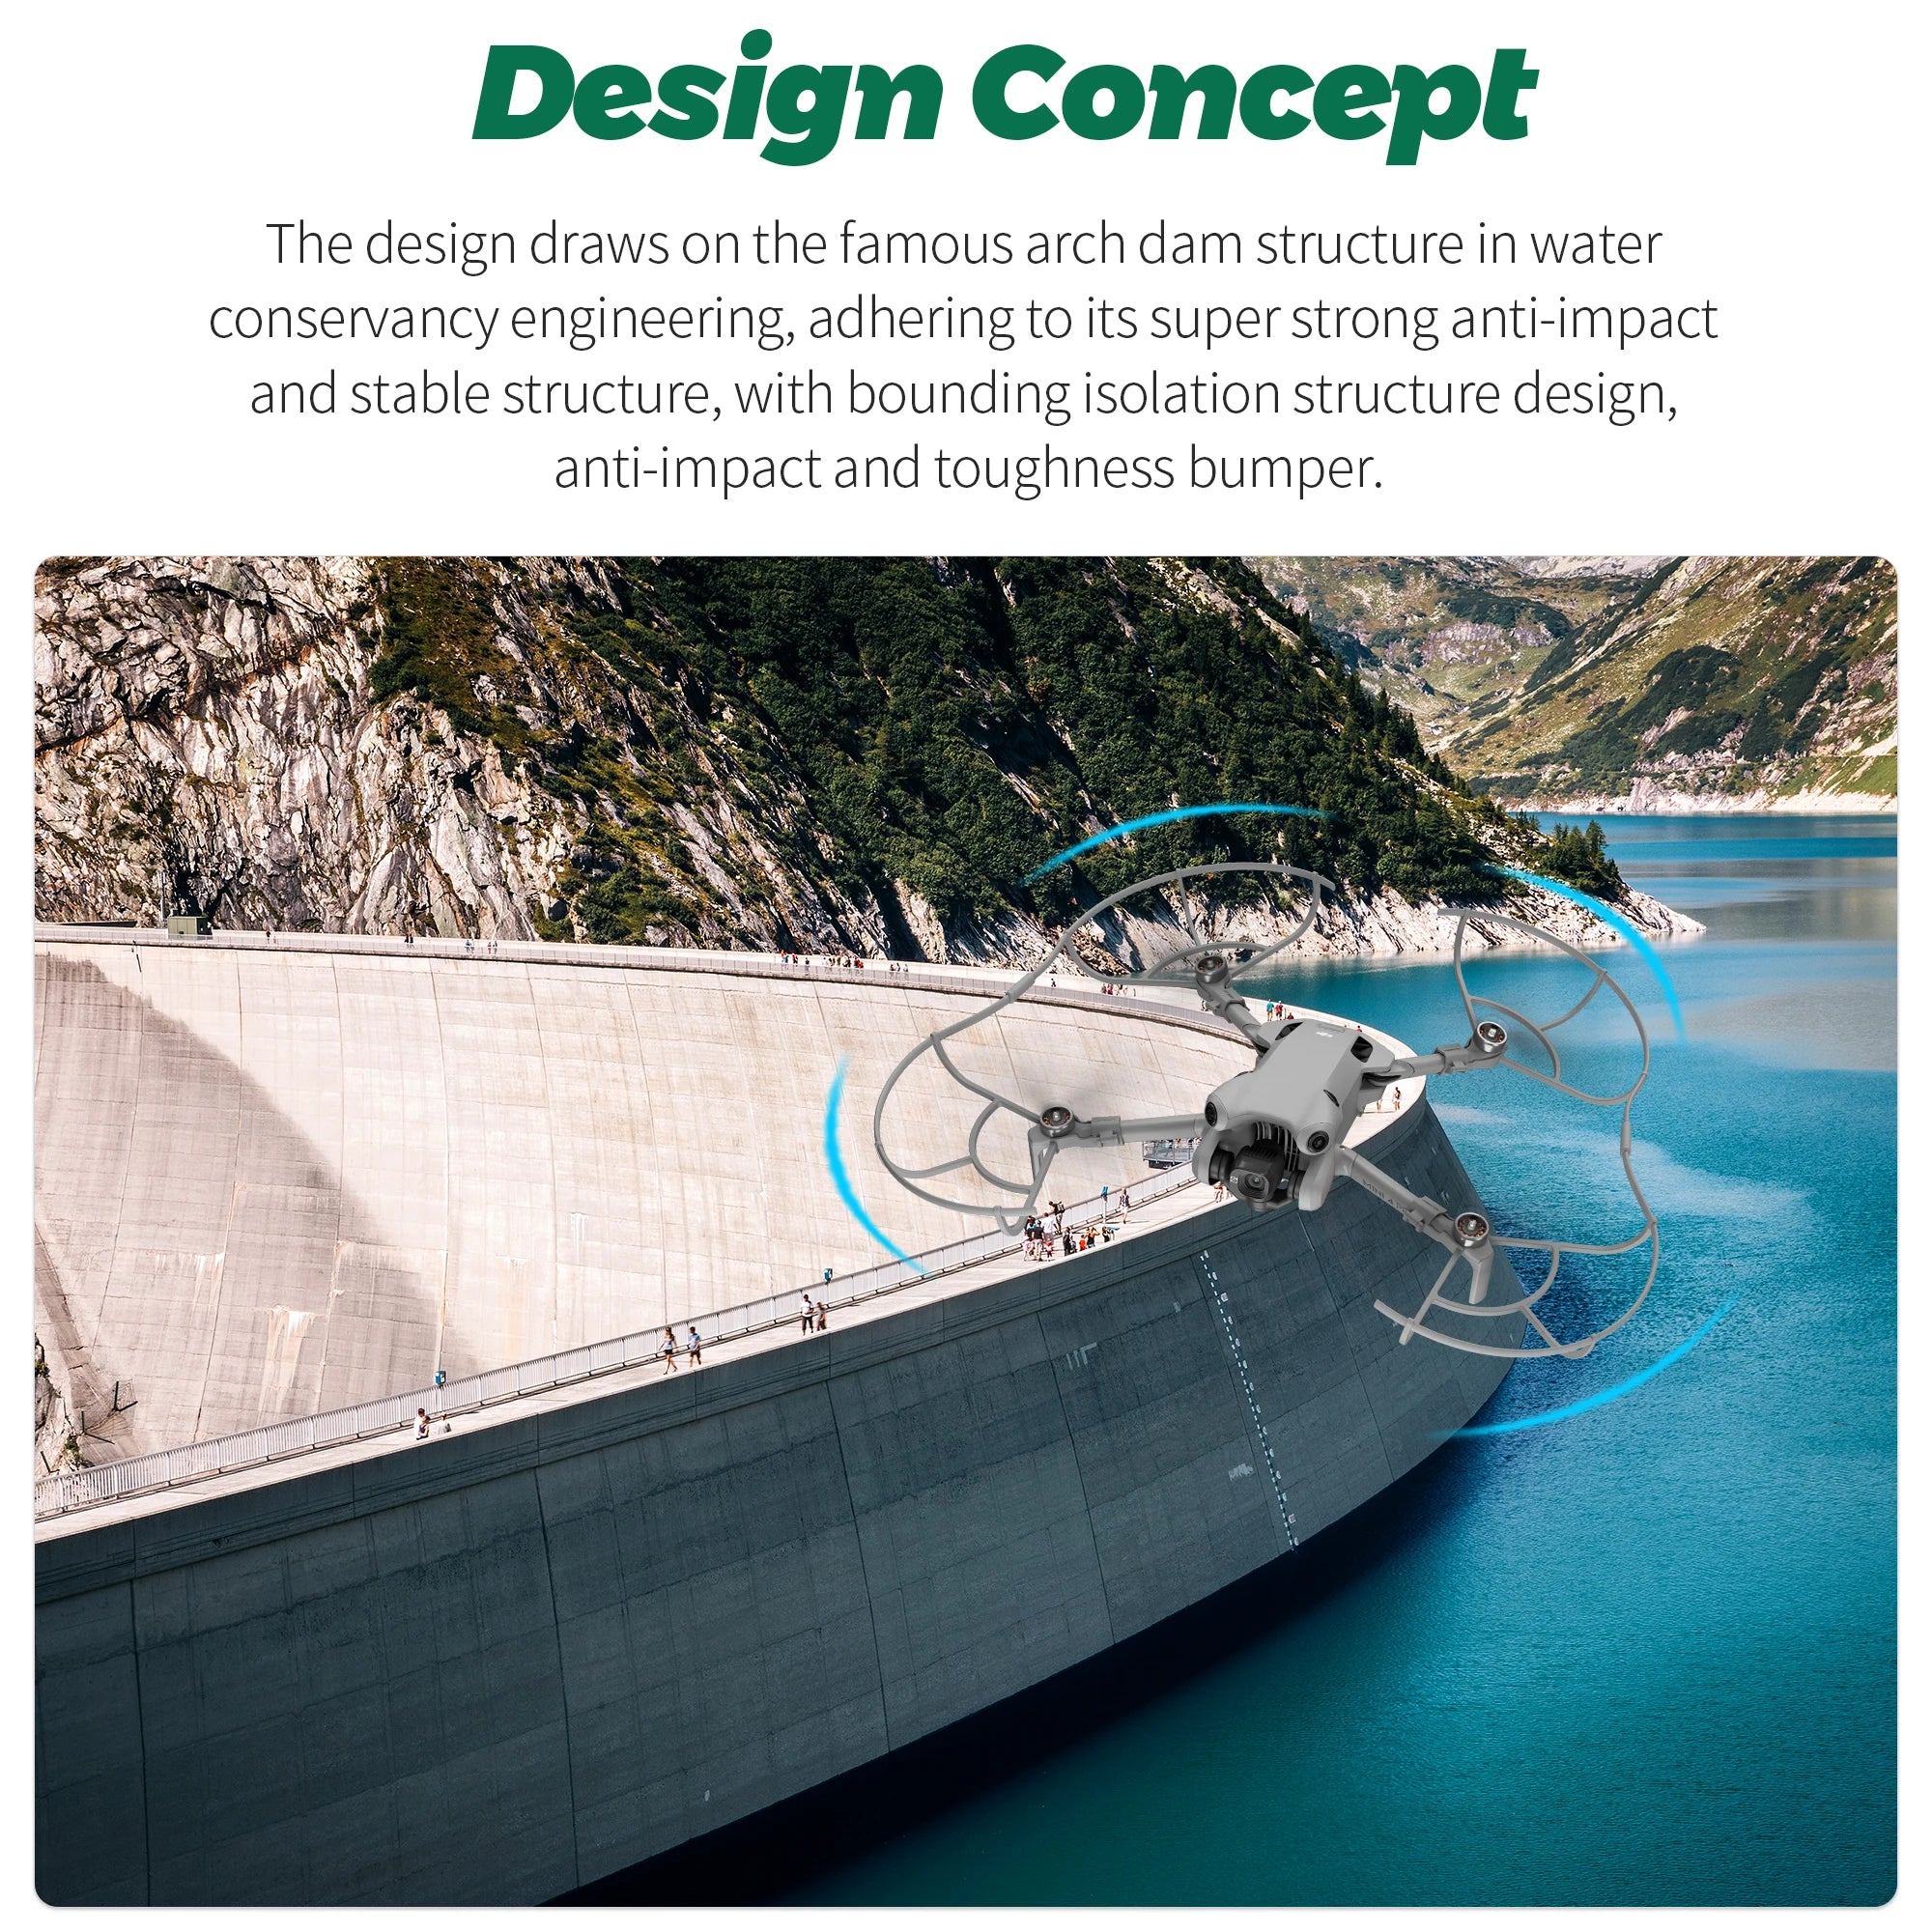 For DJI Mini 4 Pro Propeller Guard, design concept draws on the famous arch dam structure in water conservancy engineering . adhering